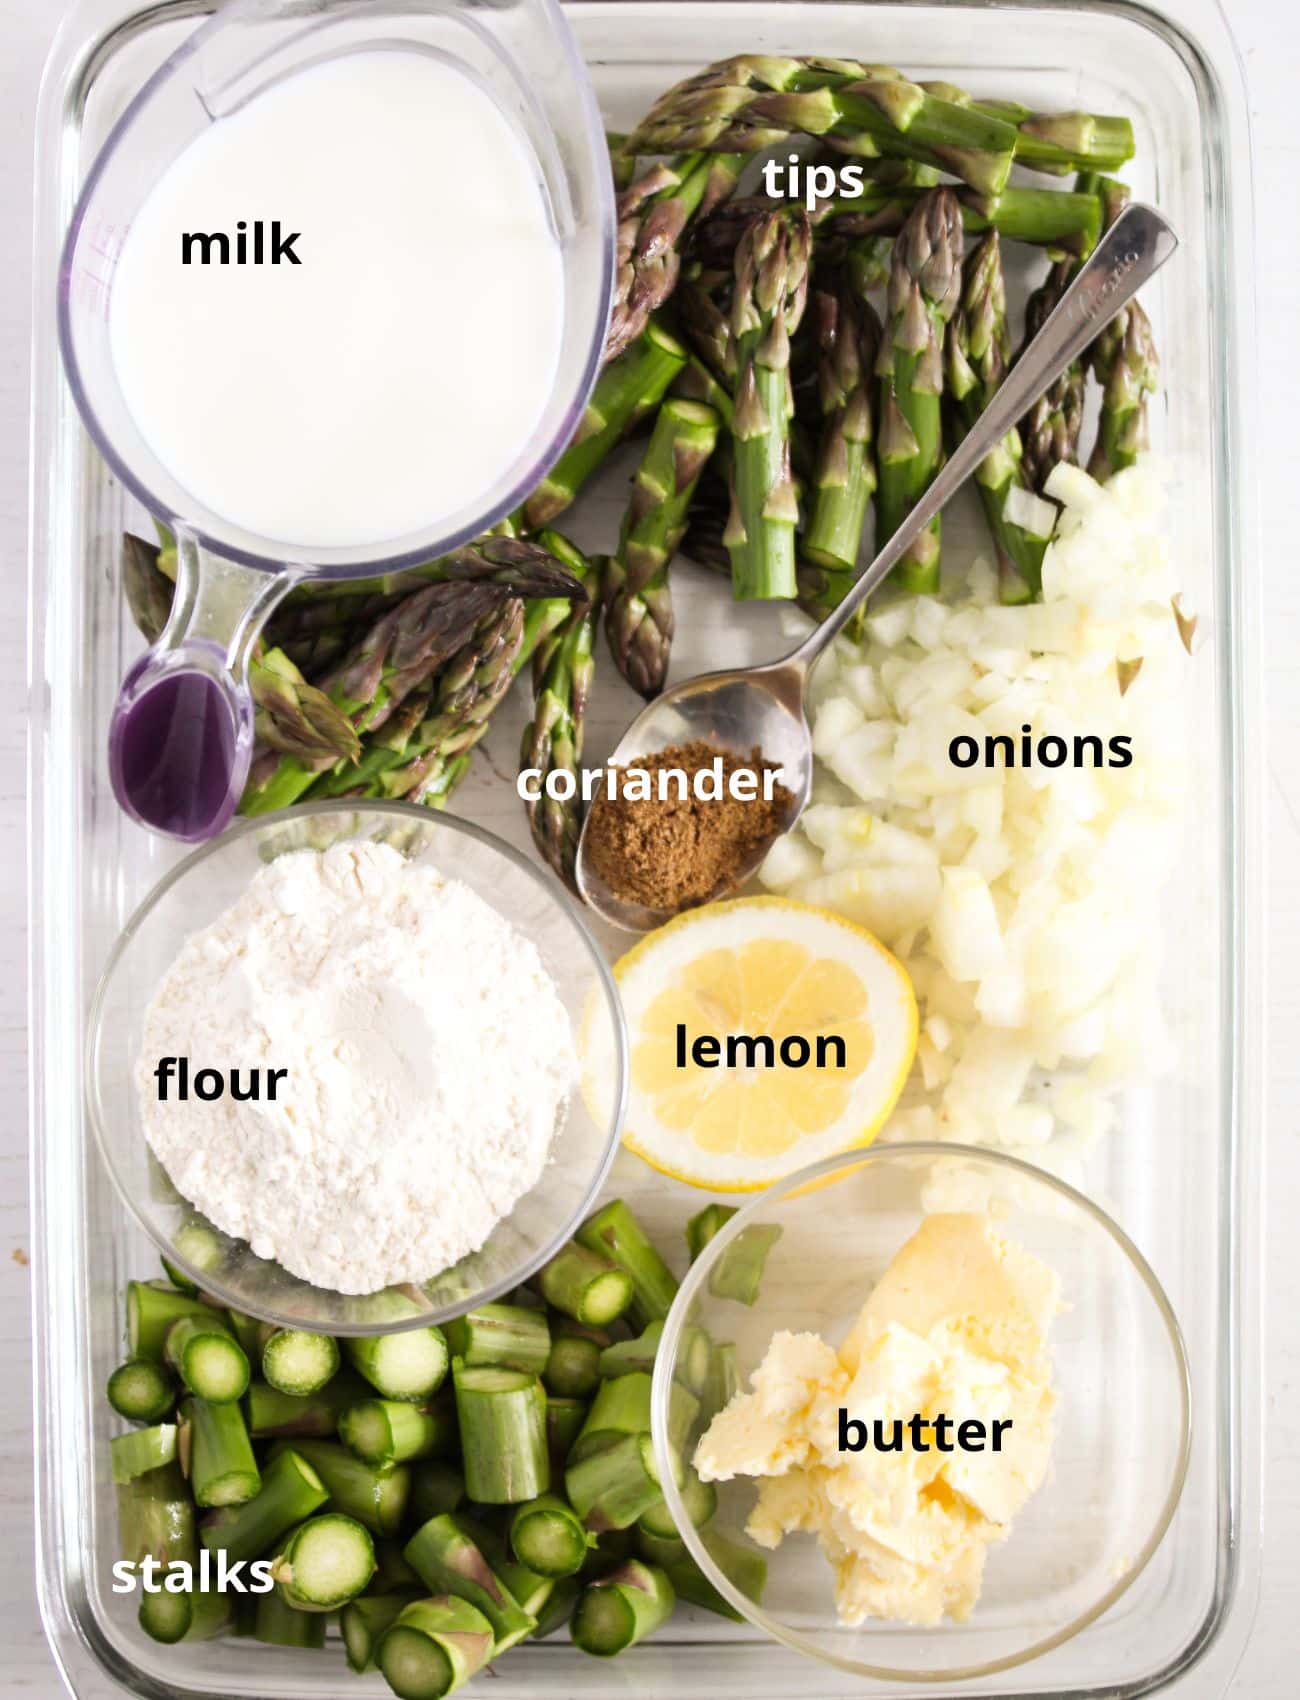 listed ingredients for making asparagus soup.